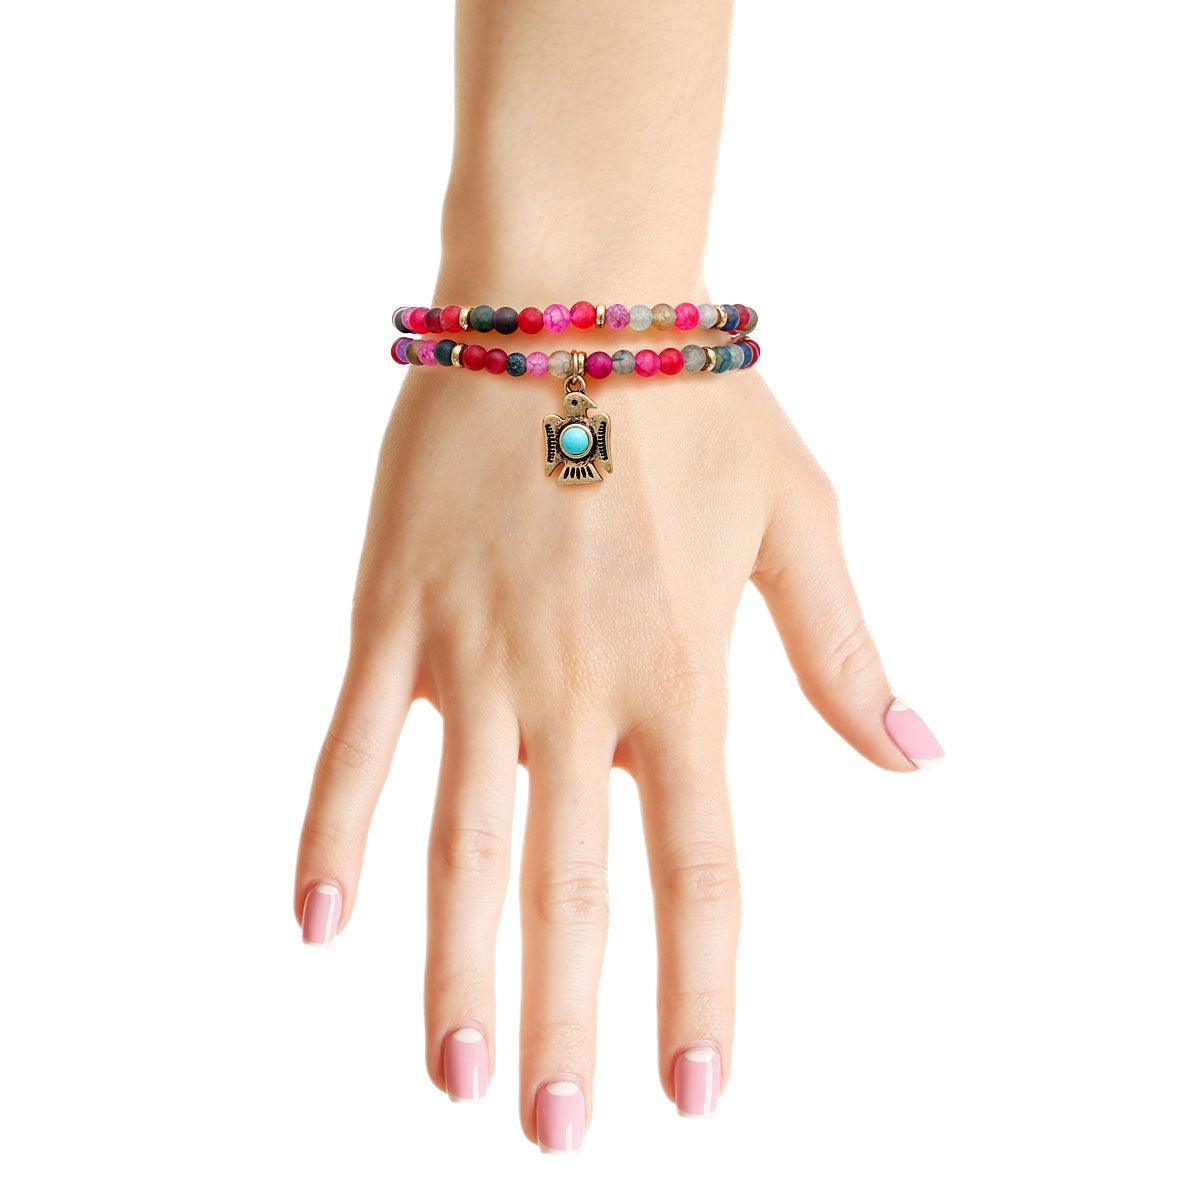 Beaded Wrap Bracelet in Fuchsia Pink with Charm Dangle